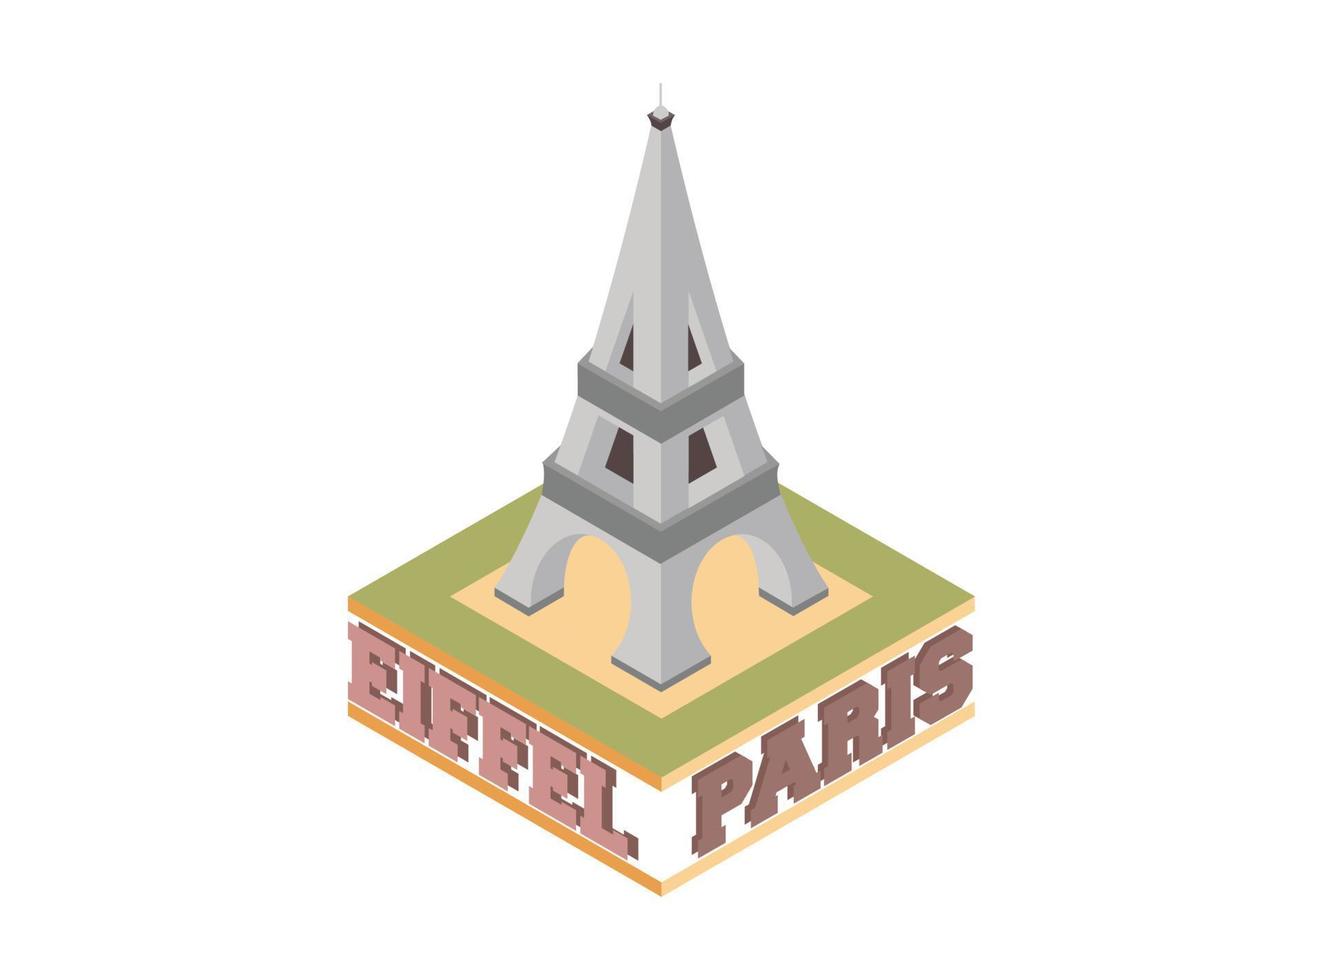 3d isometric Christian catholic church building. Vector illustration. Architecture concept. Isolated model in flat cartoon style. Can be used for wedding cards, games, web design.